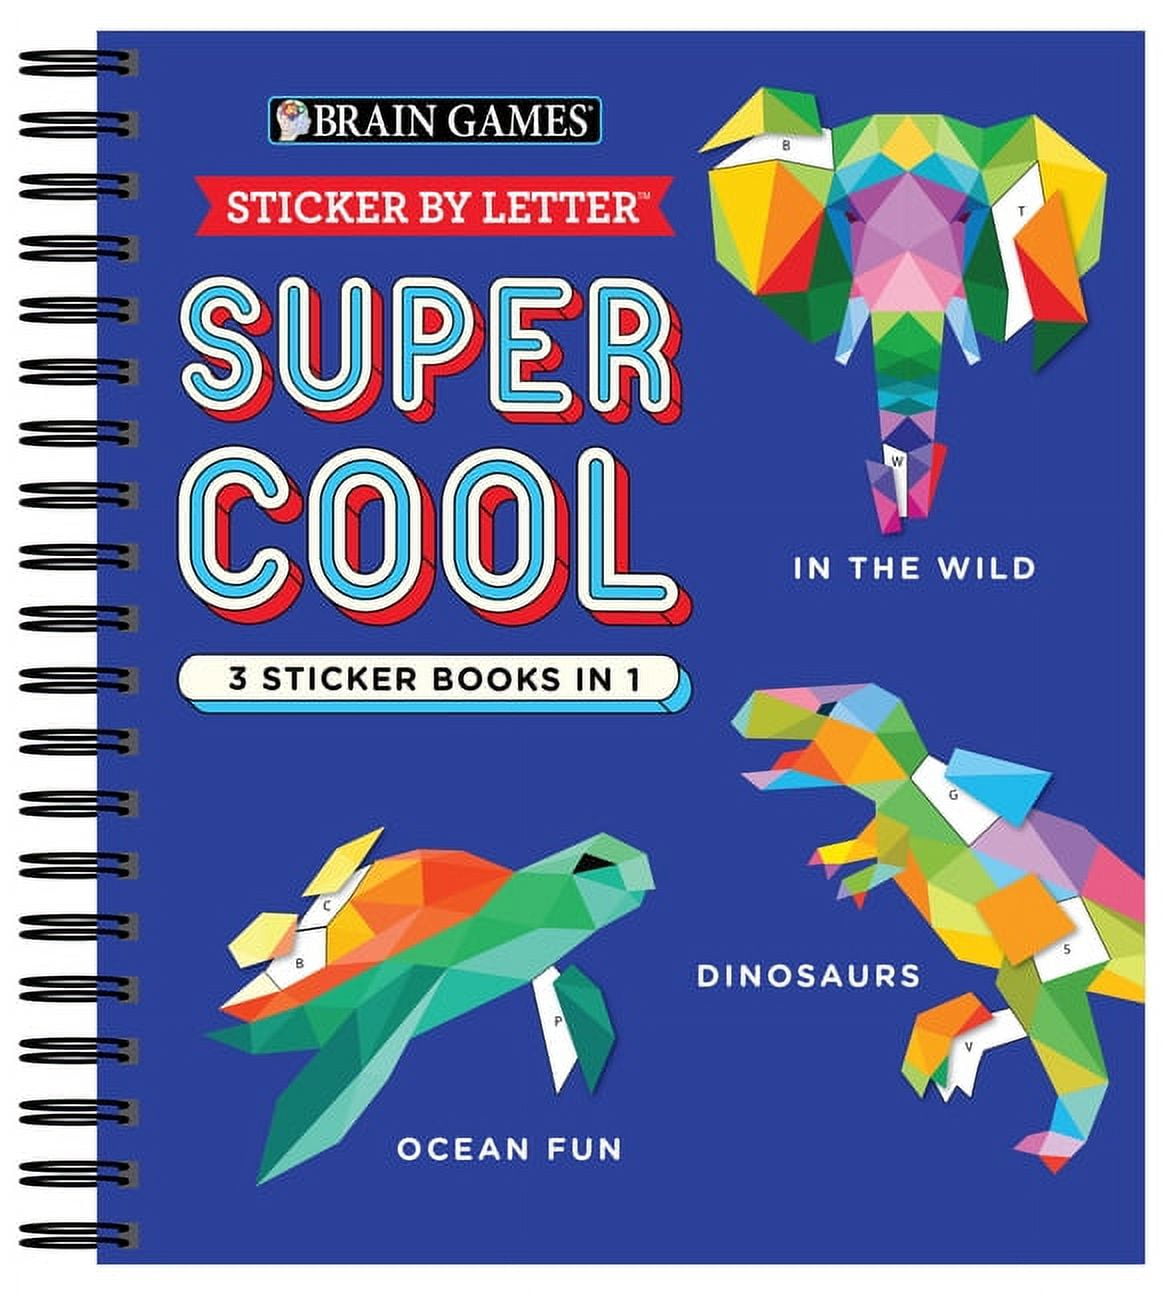 Brain Games - Sticker by Letter: Super Cool - 3 Sticker Books in 1 (30  Images to Sticker: In the Wild, Dinosaurs, Ocean Fun) (Spiral)